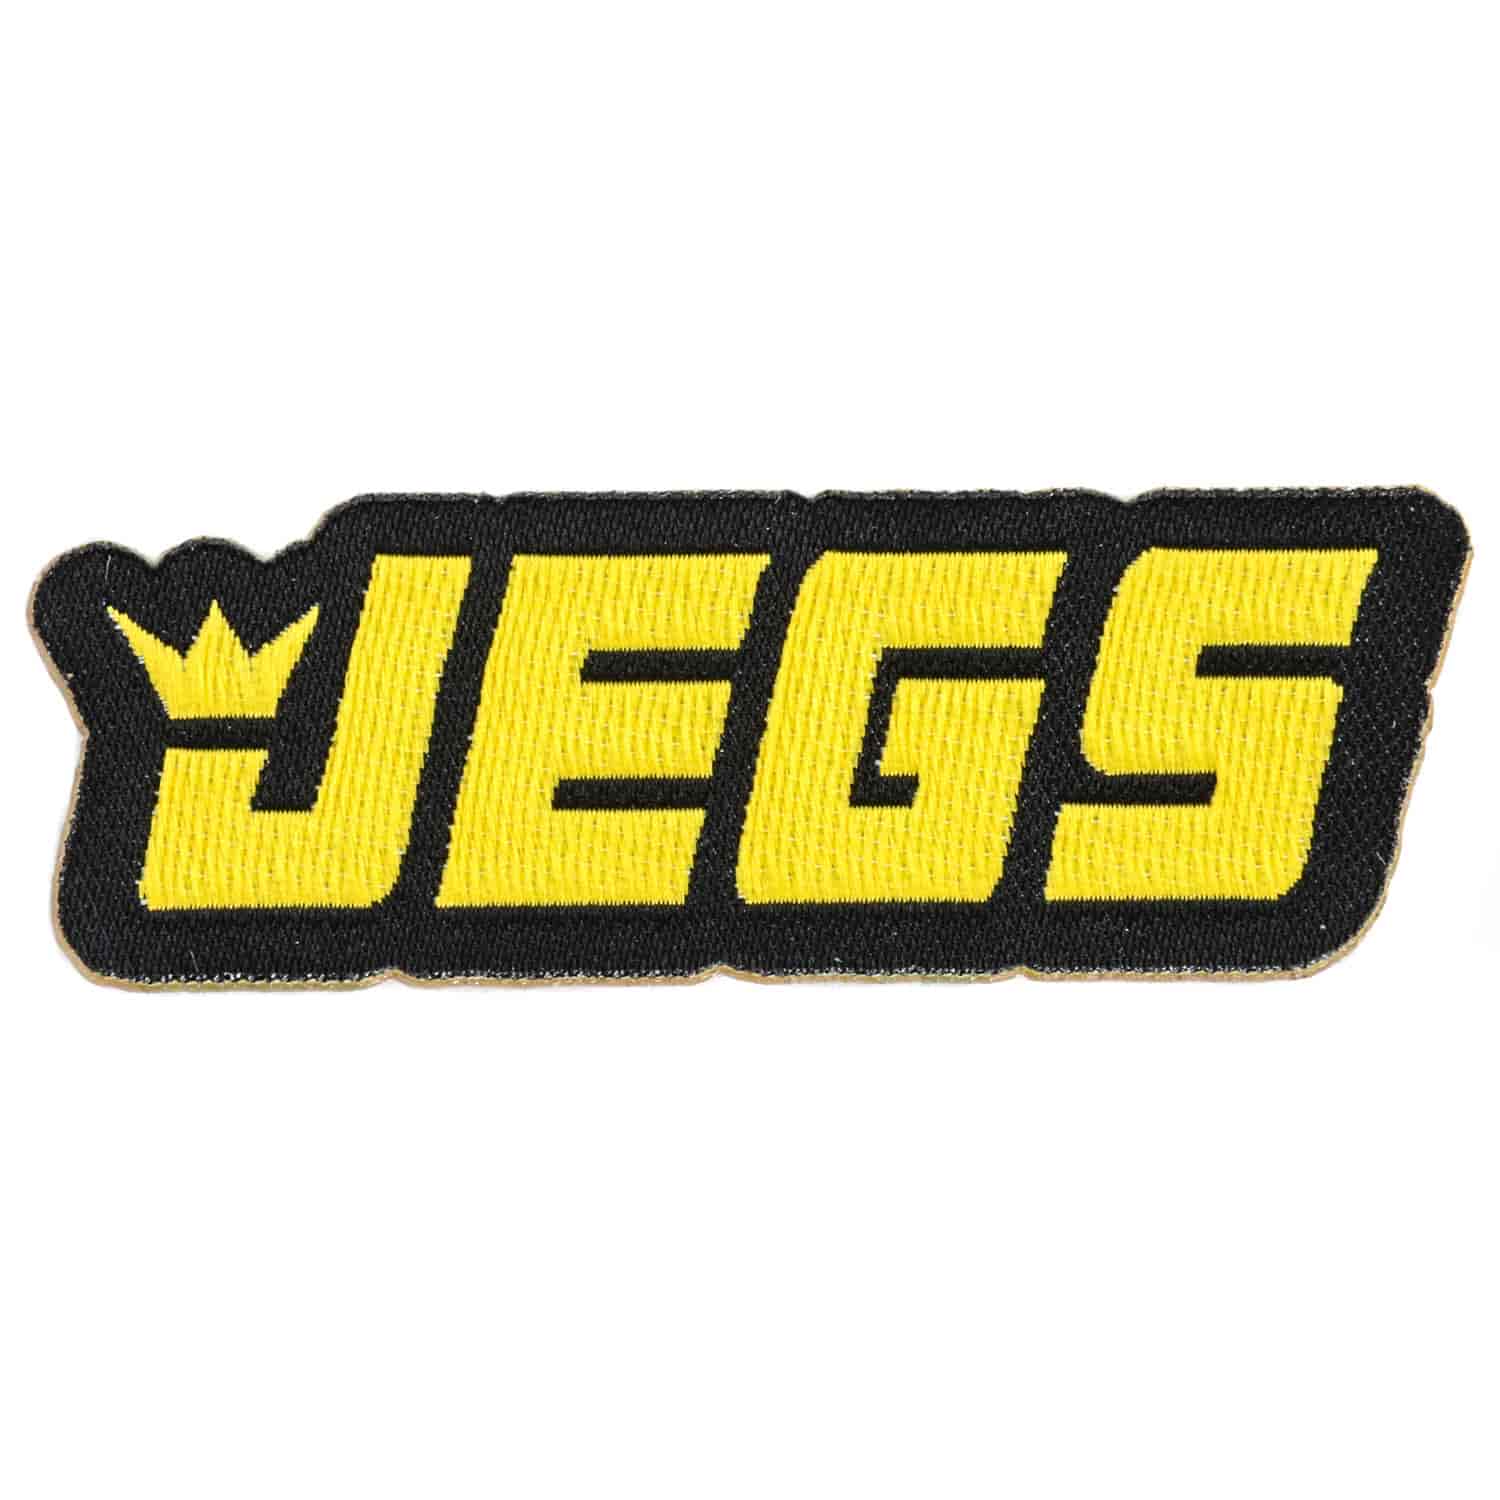 Patch, Customize Your Own Apparel [2.500 in. L x 2 in. W] Yellow